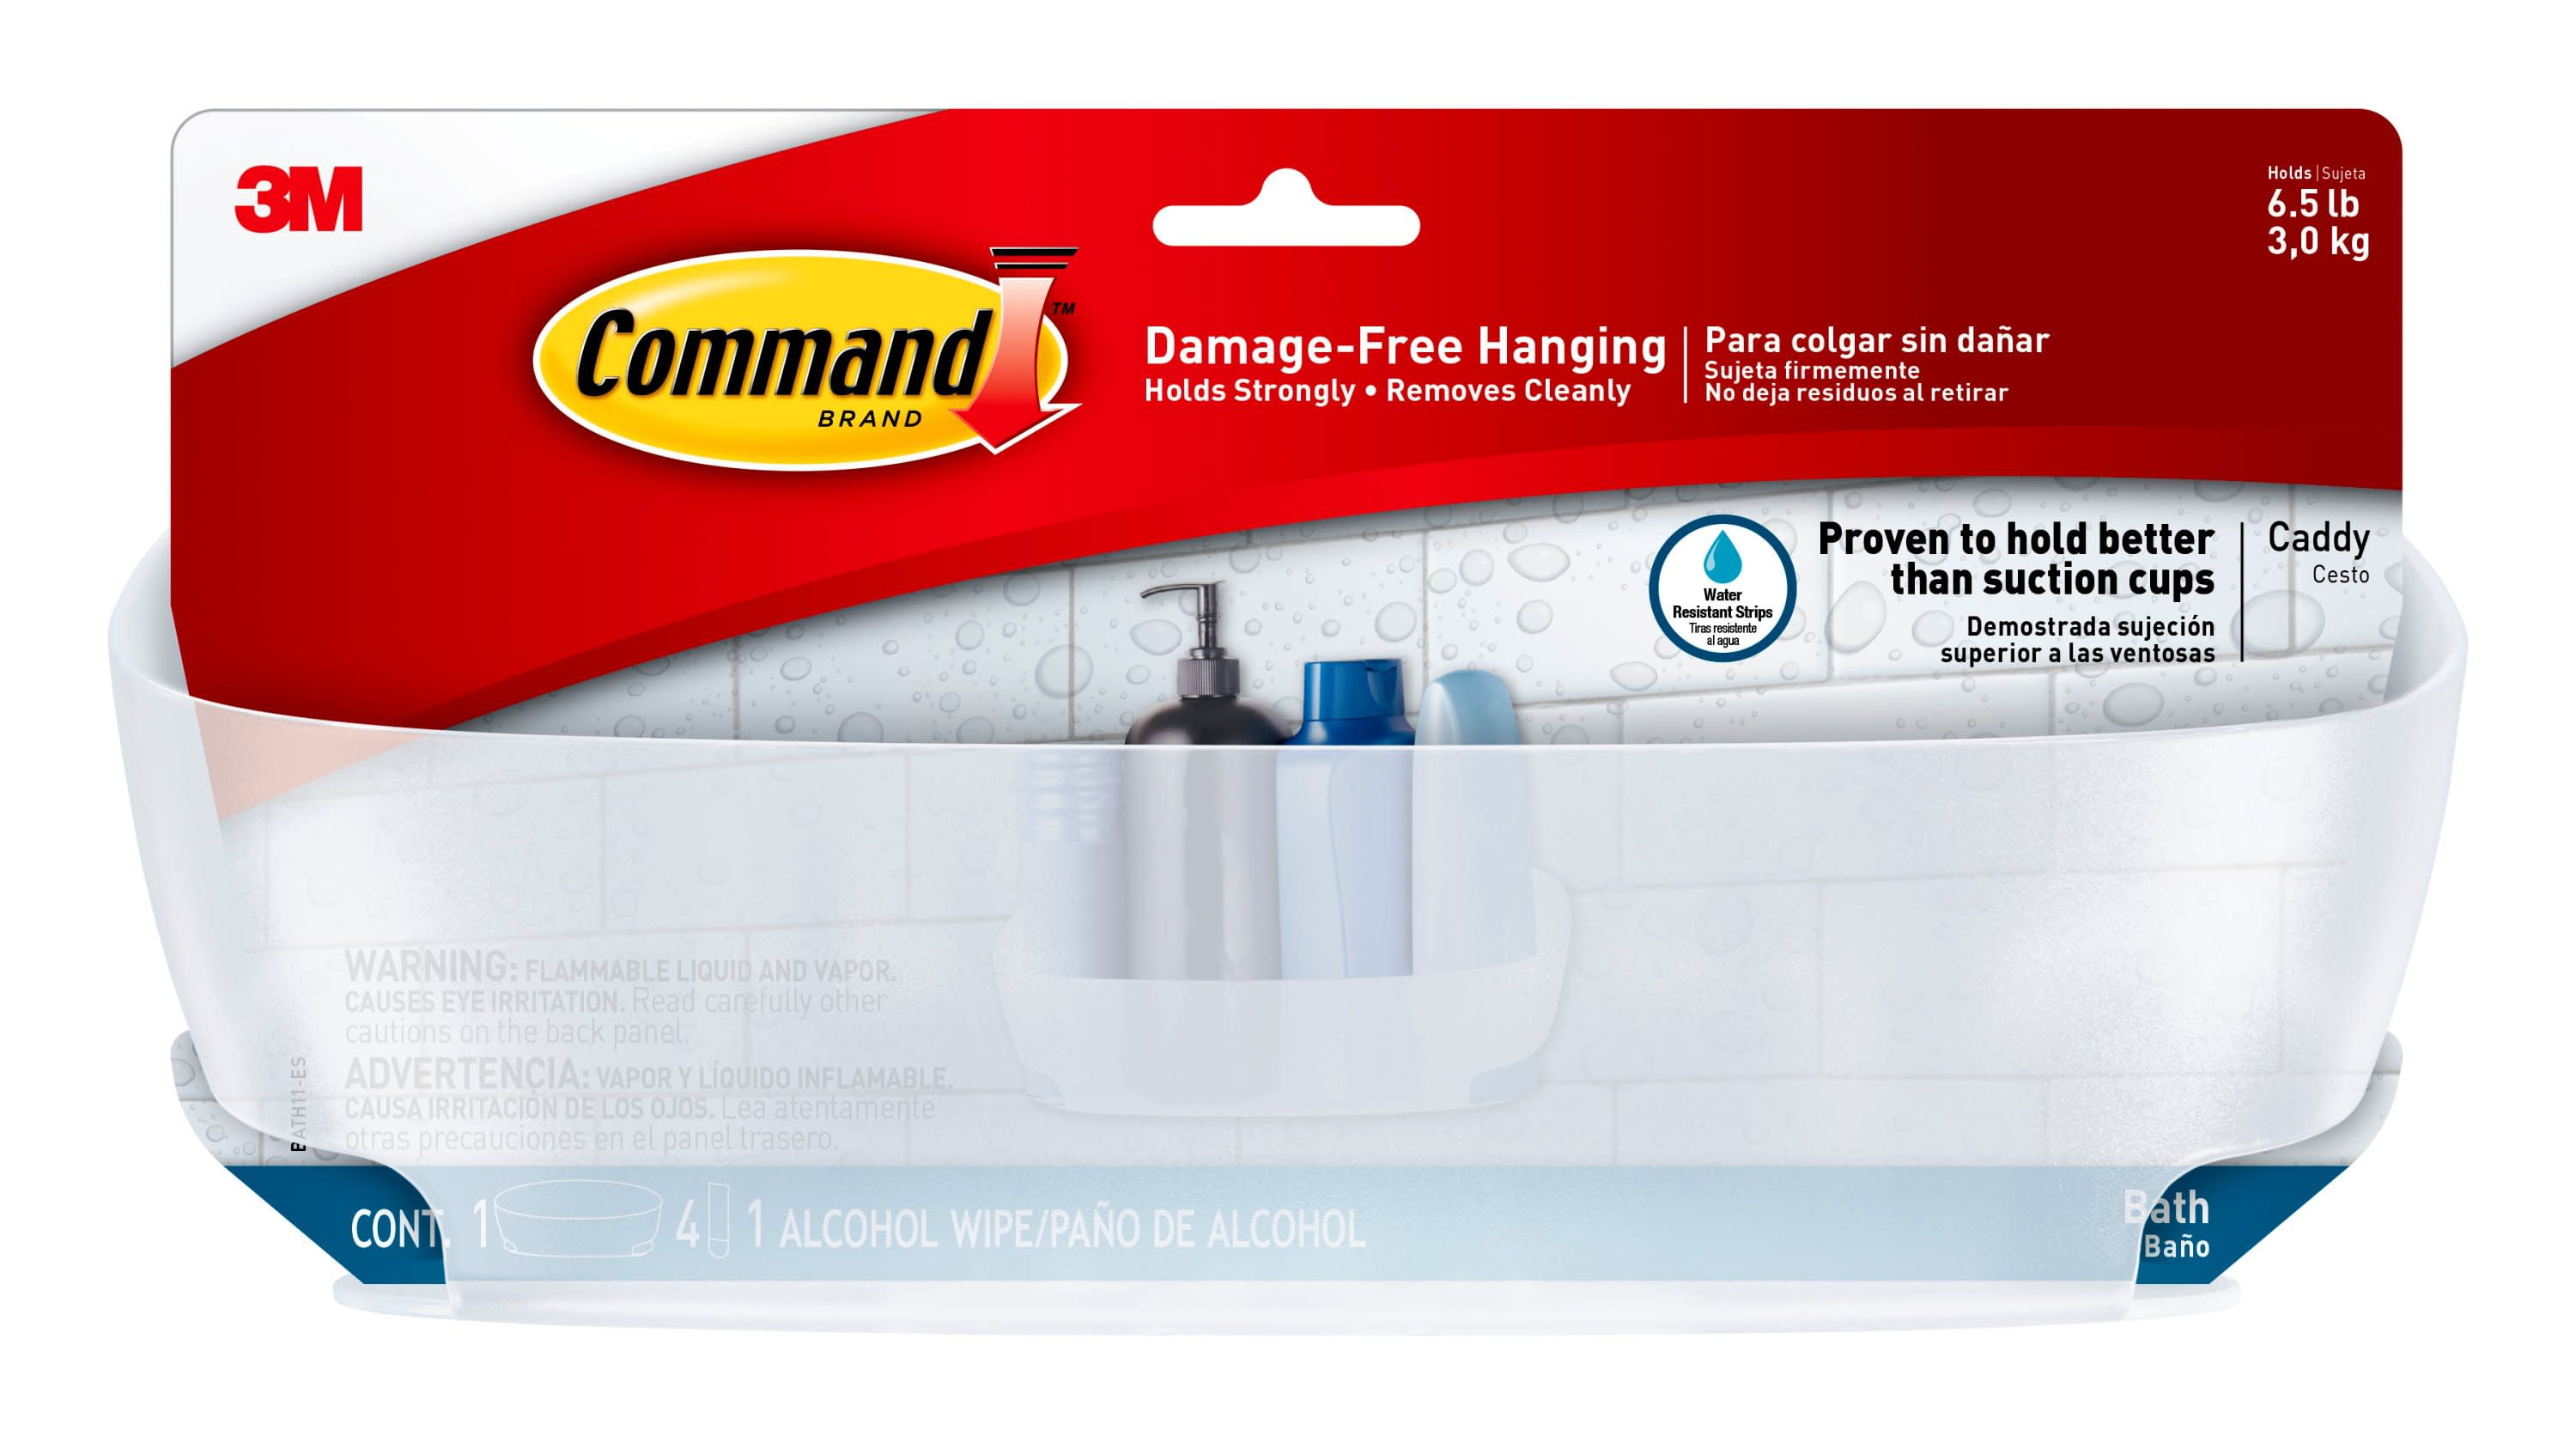 3M Command BRAND Soap Dish Damage Hanging for sale online 